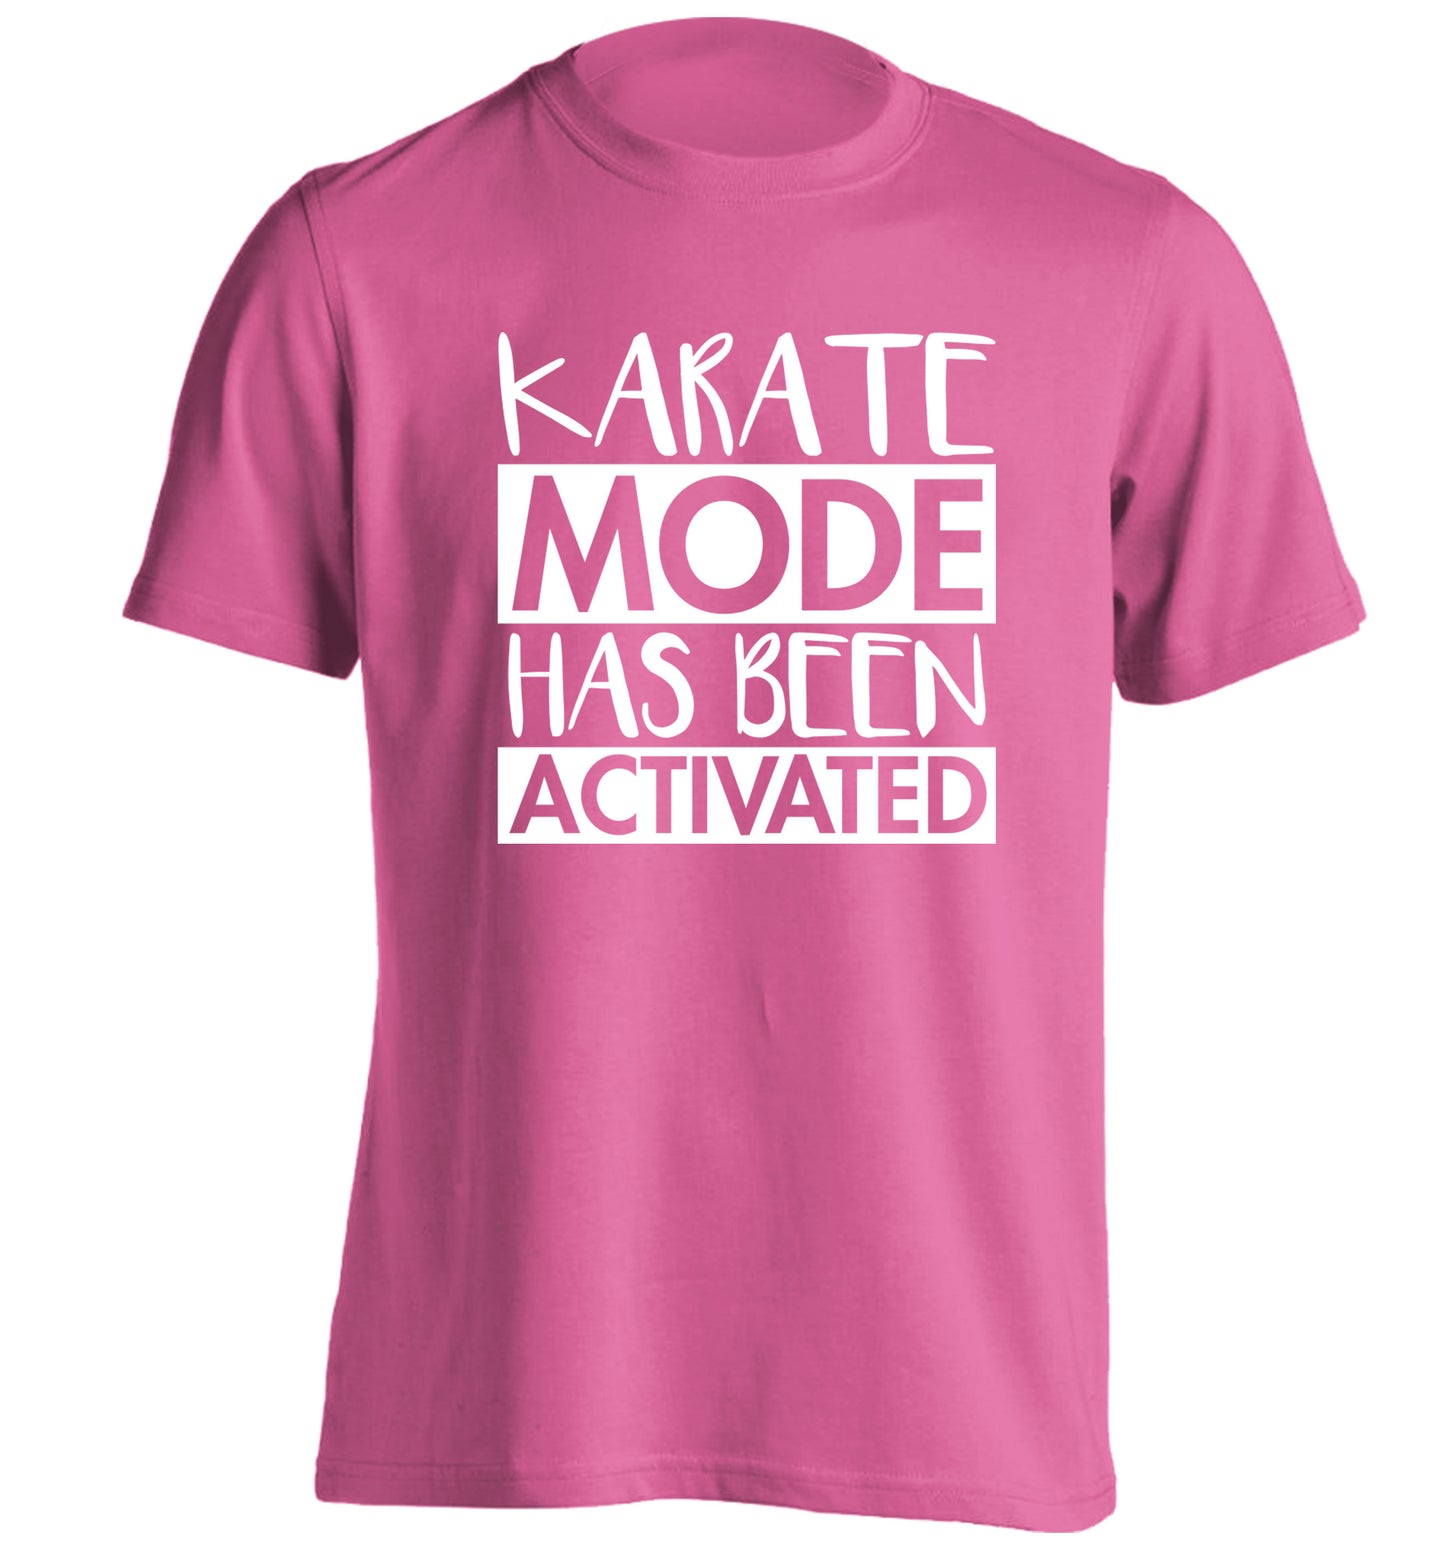 Karate mode activated adults unisex pink Tshirt 2XL